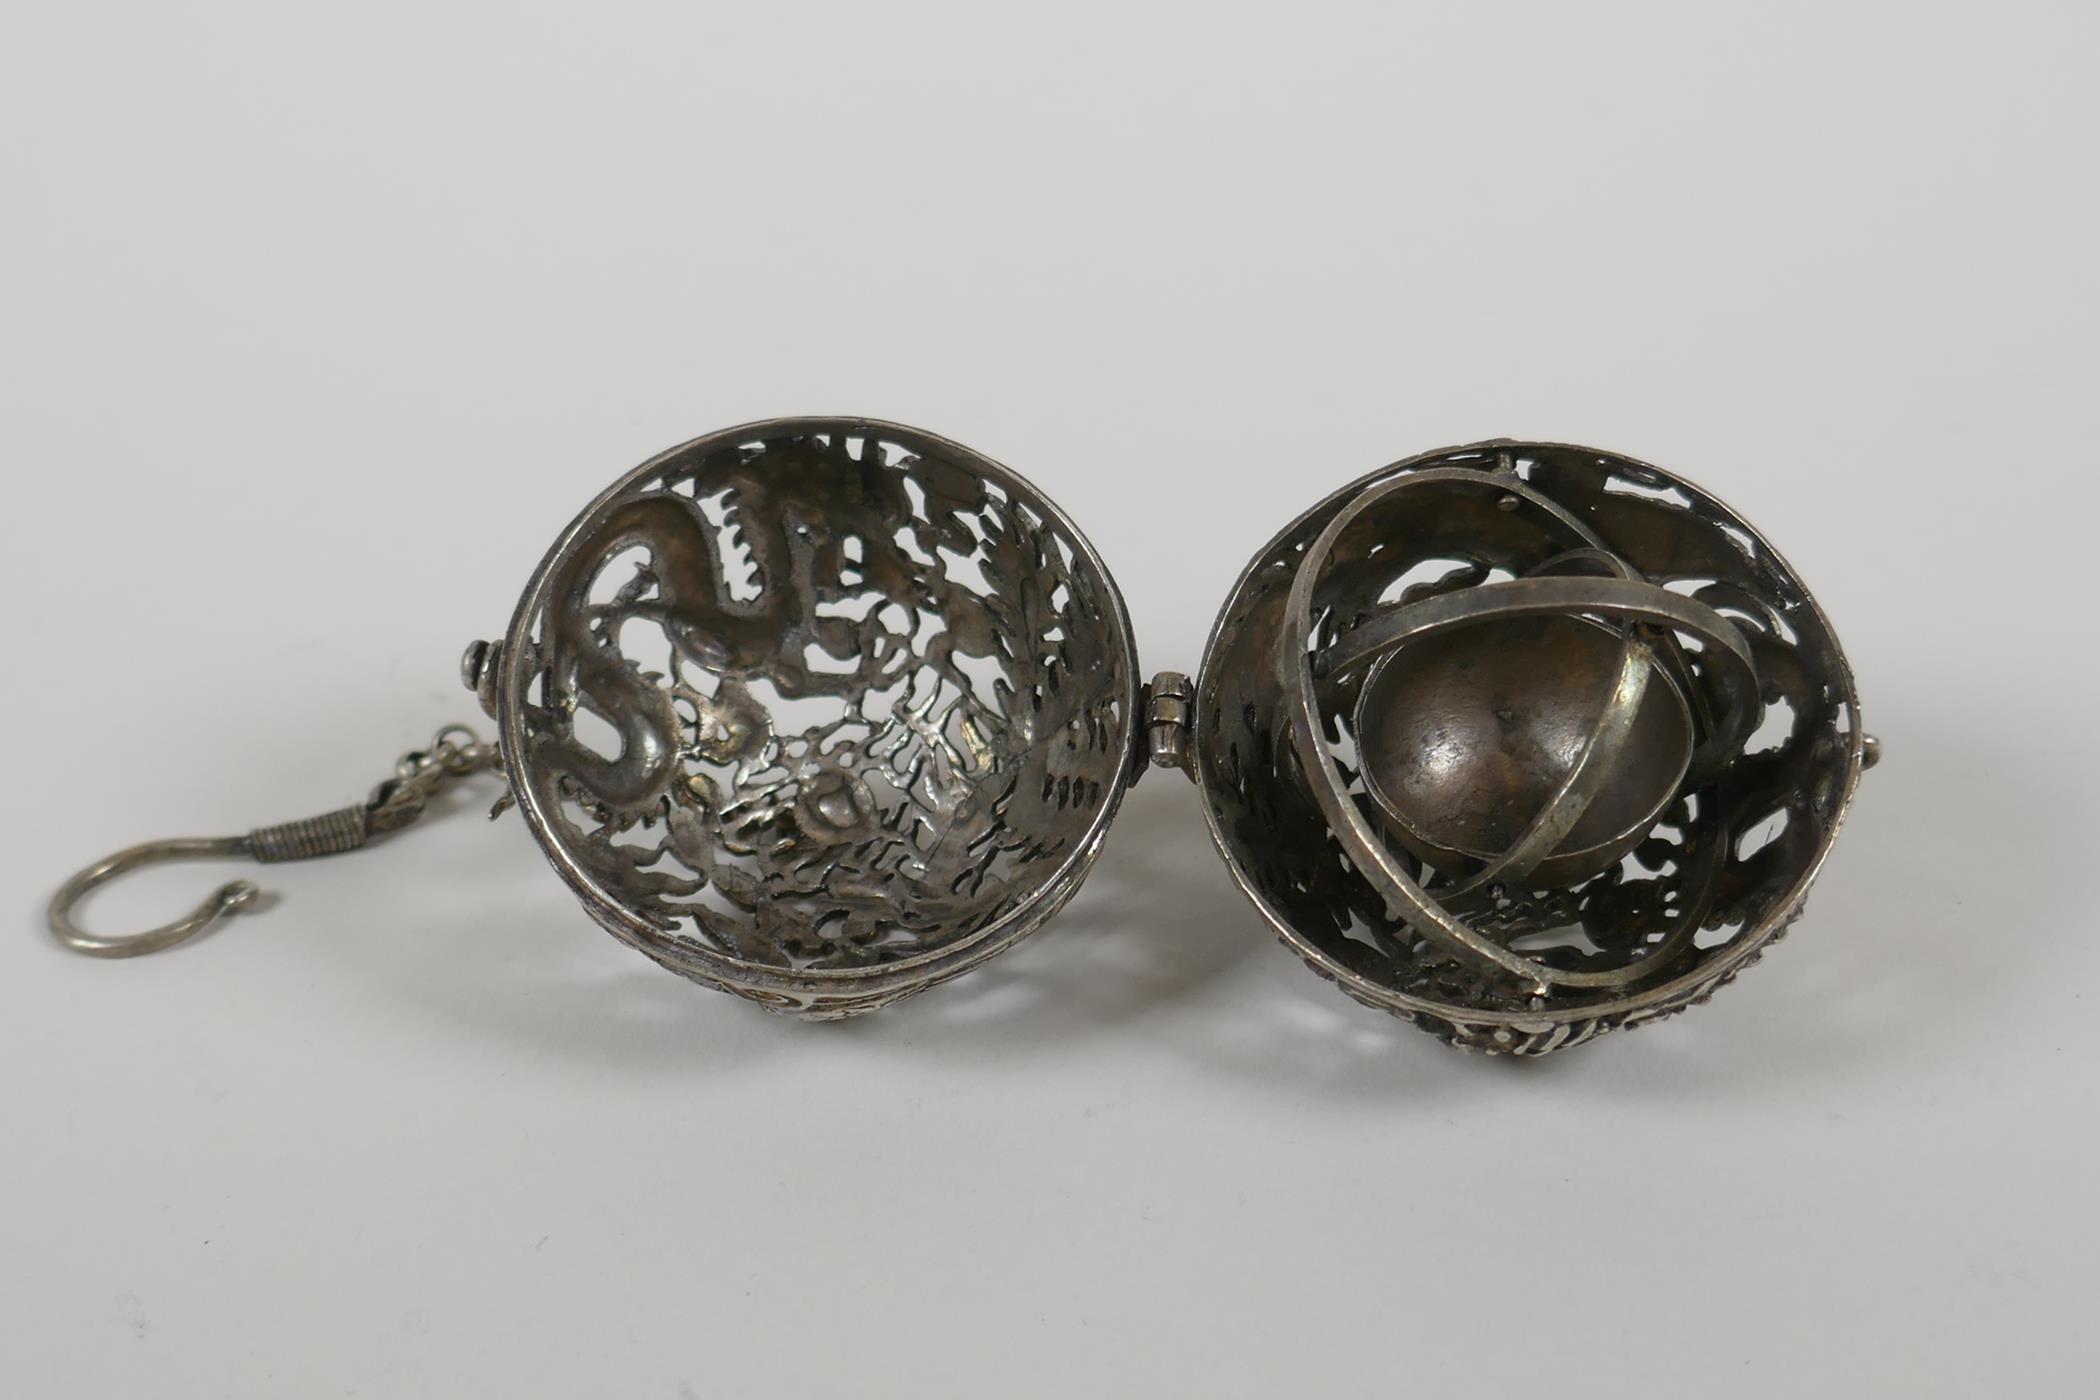 A Chinese white metal pierced ball incense burner, with a gimbal mouted reservoir, 2" diameter - Image 2 of 3